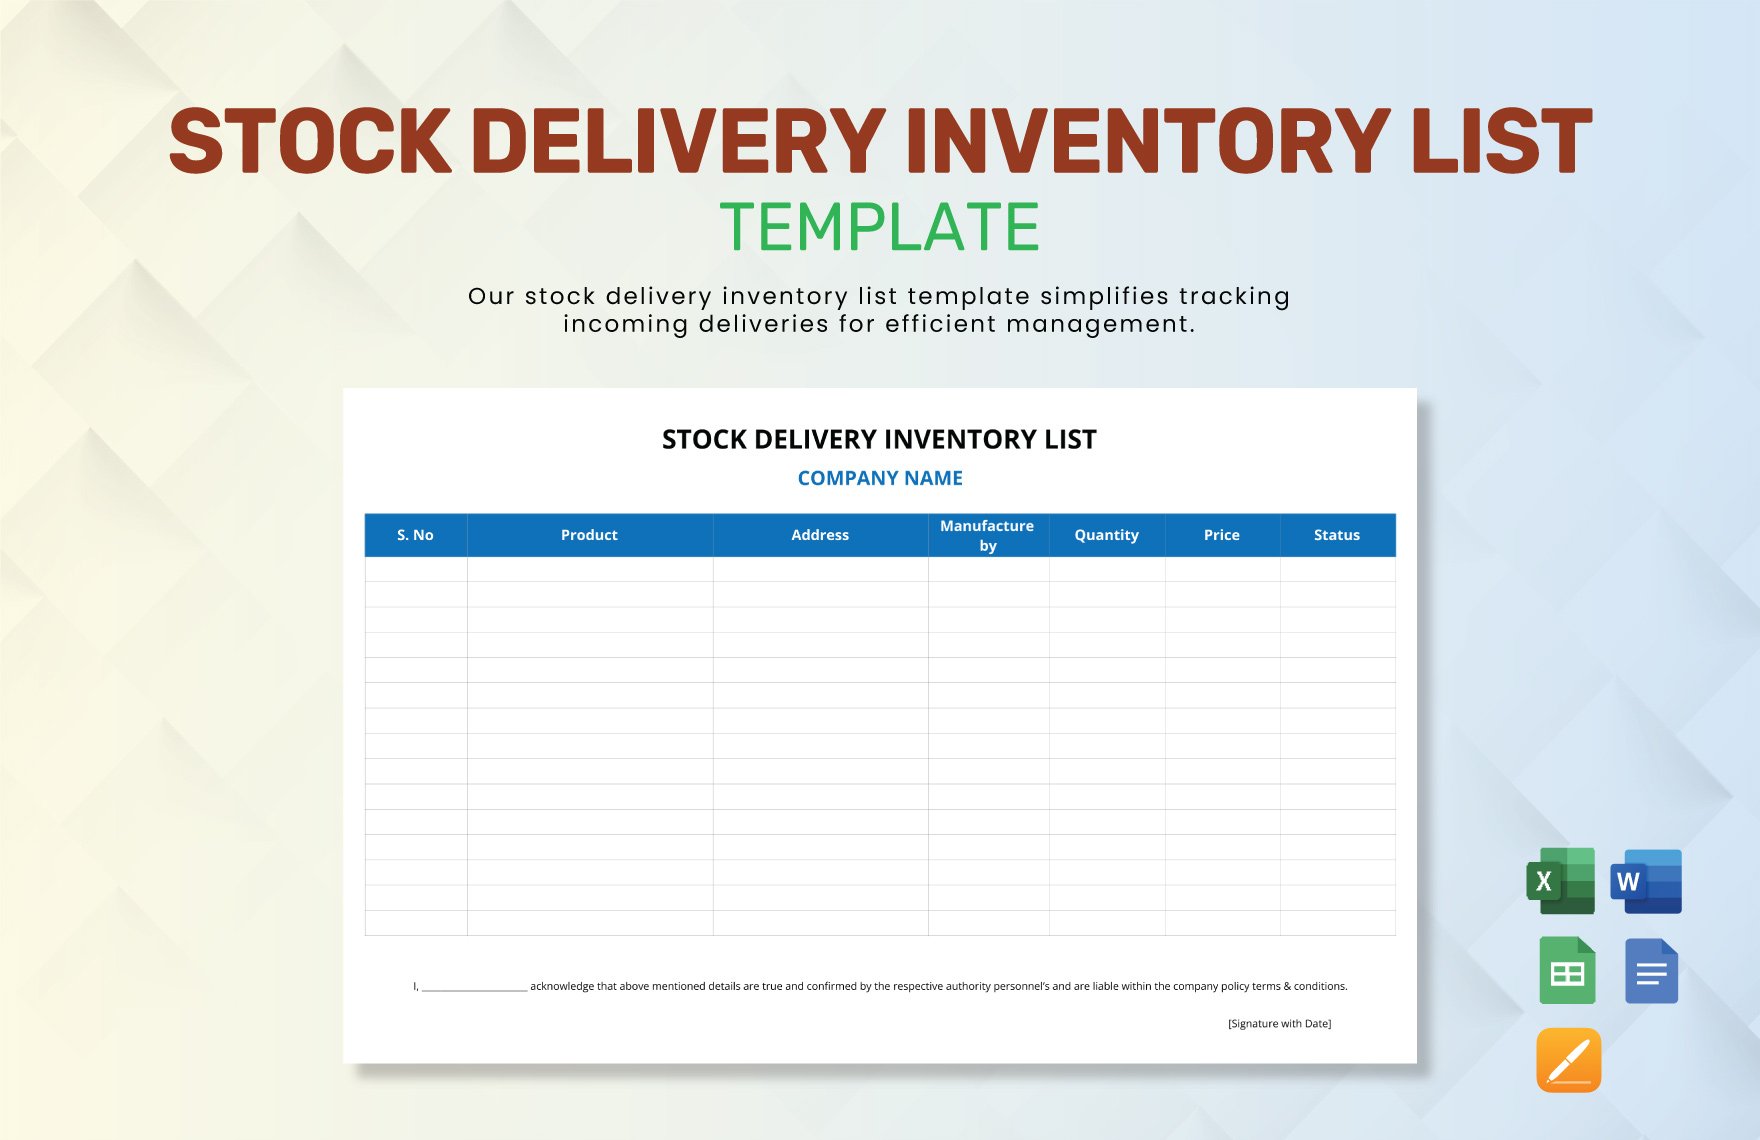 Stock Delivery Inventory List Template in Word, Google Docs, Excel, Google Sheets, Apple Pages